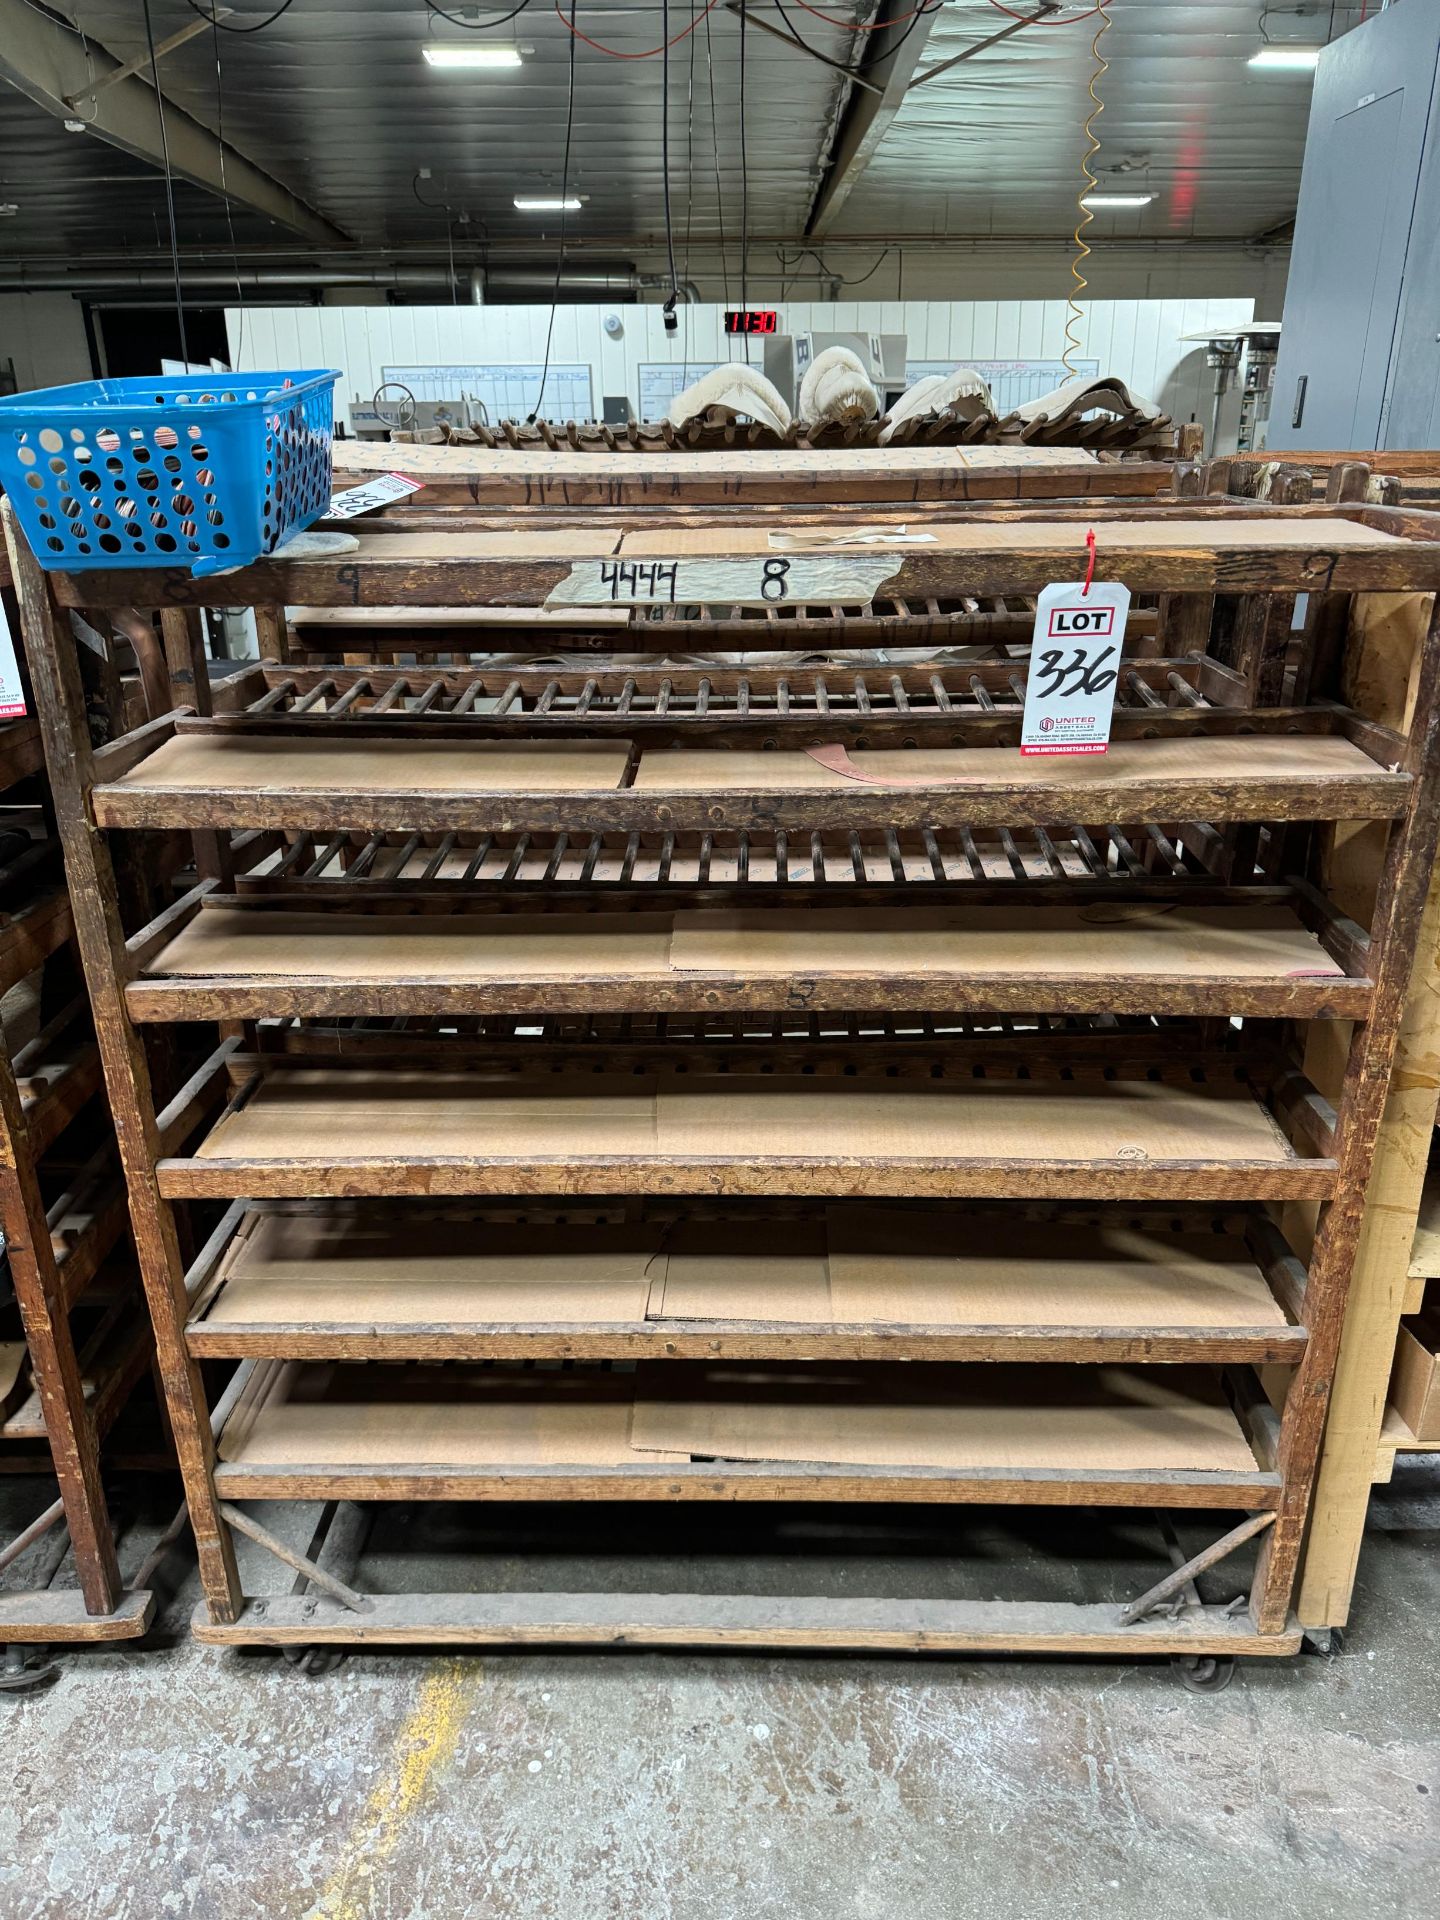 LOT - ROLLING SHOE RACKS, CONTENTS NOT INCLUDED - Image 2 of 7